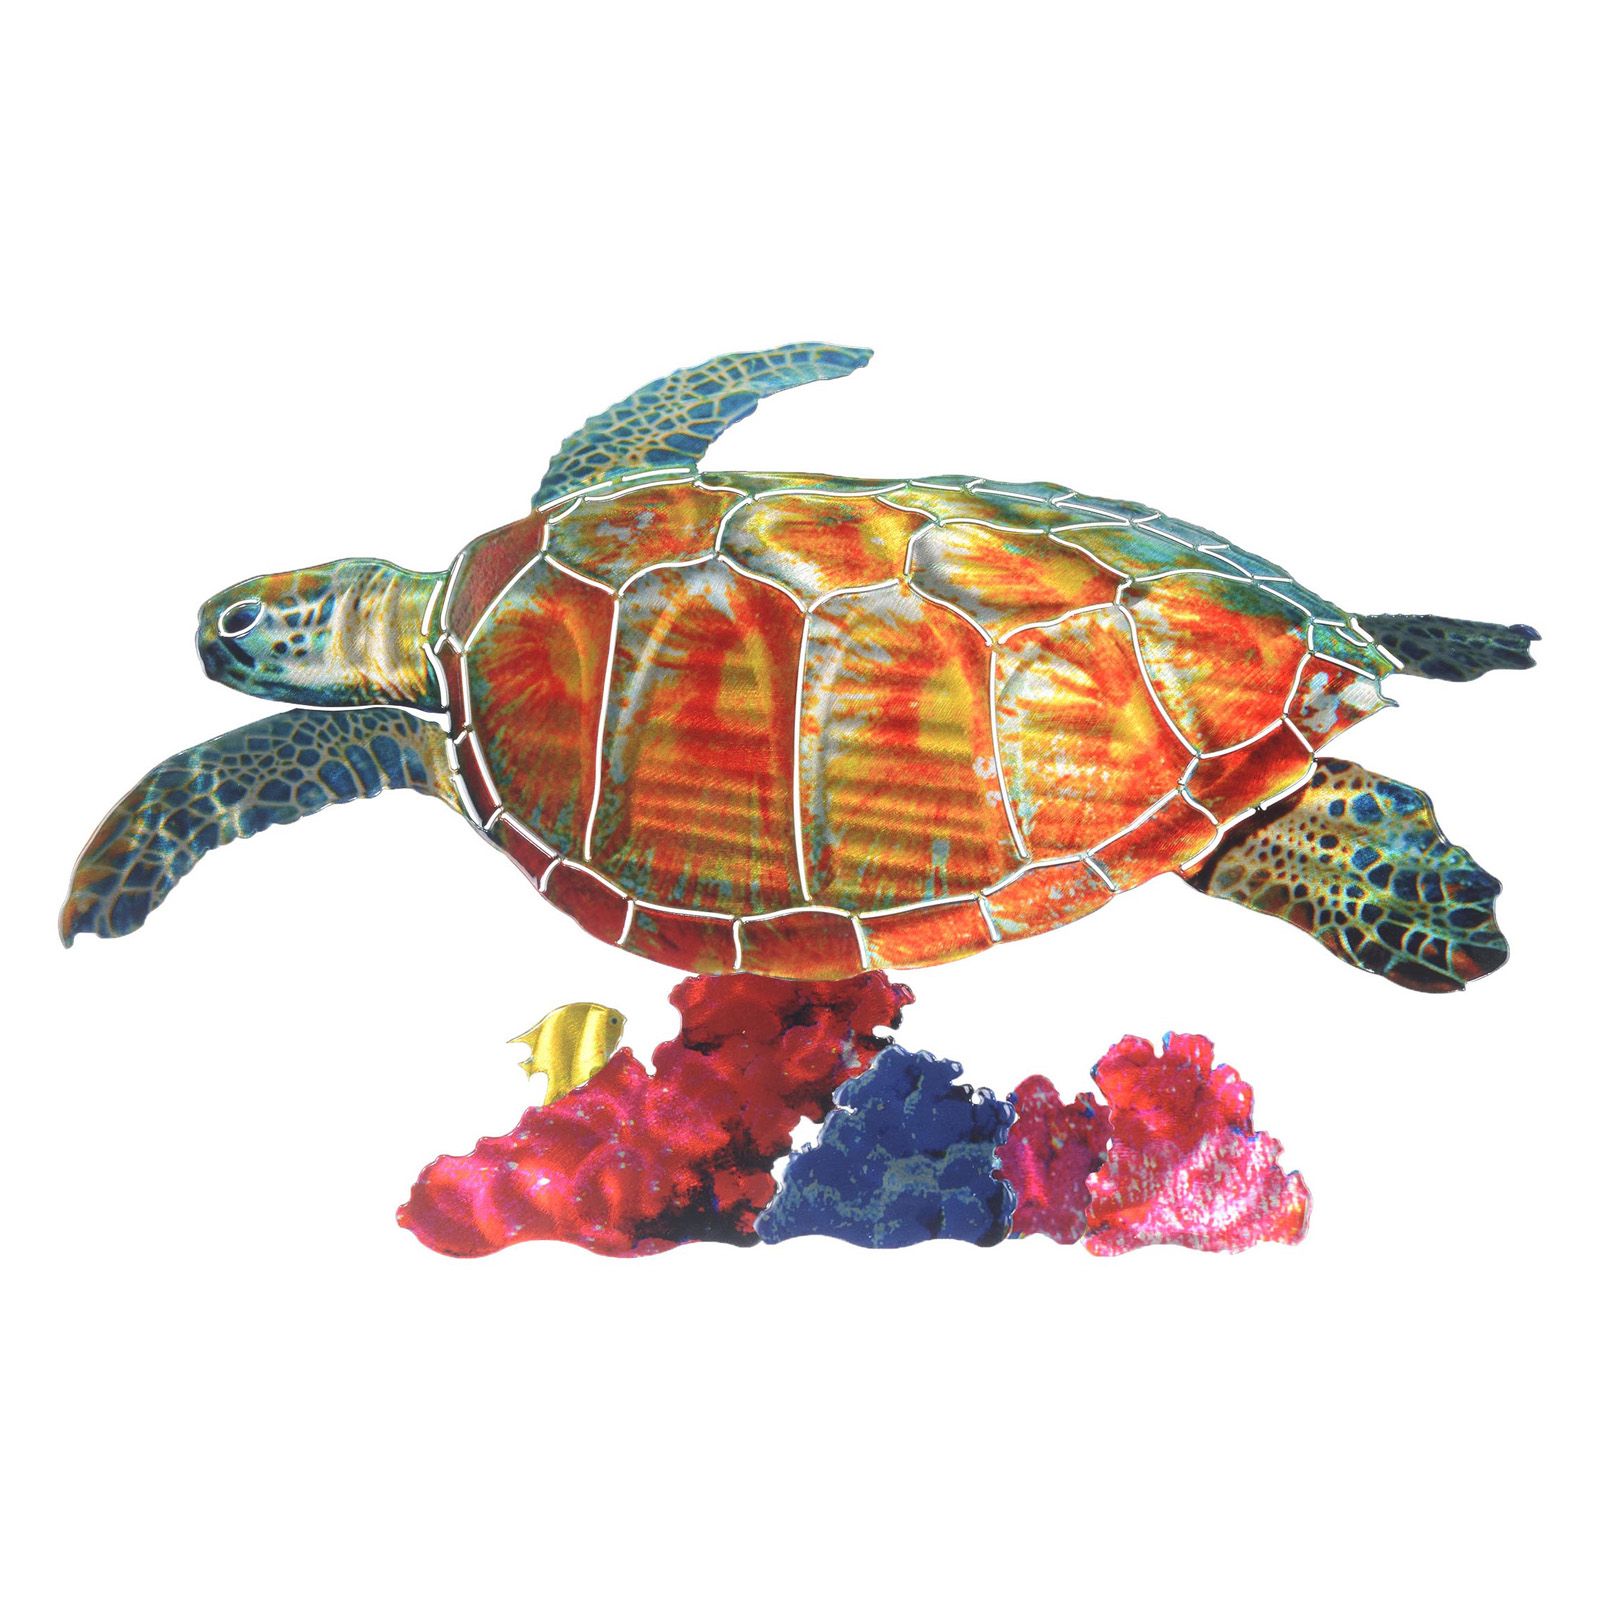 Next Innovations Sea Turtle 3d Metal Wall Art – Outdoor Wall Art At With Most Up To Date Turtles Wall Art (View 17 of 20)